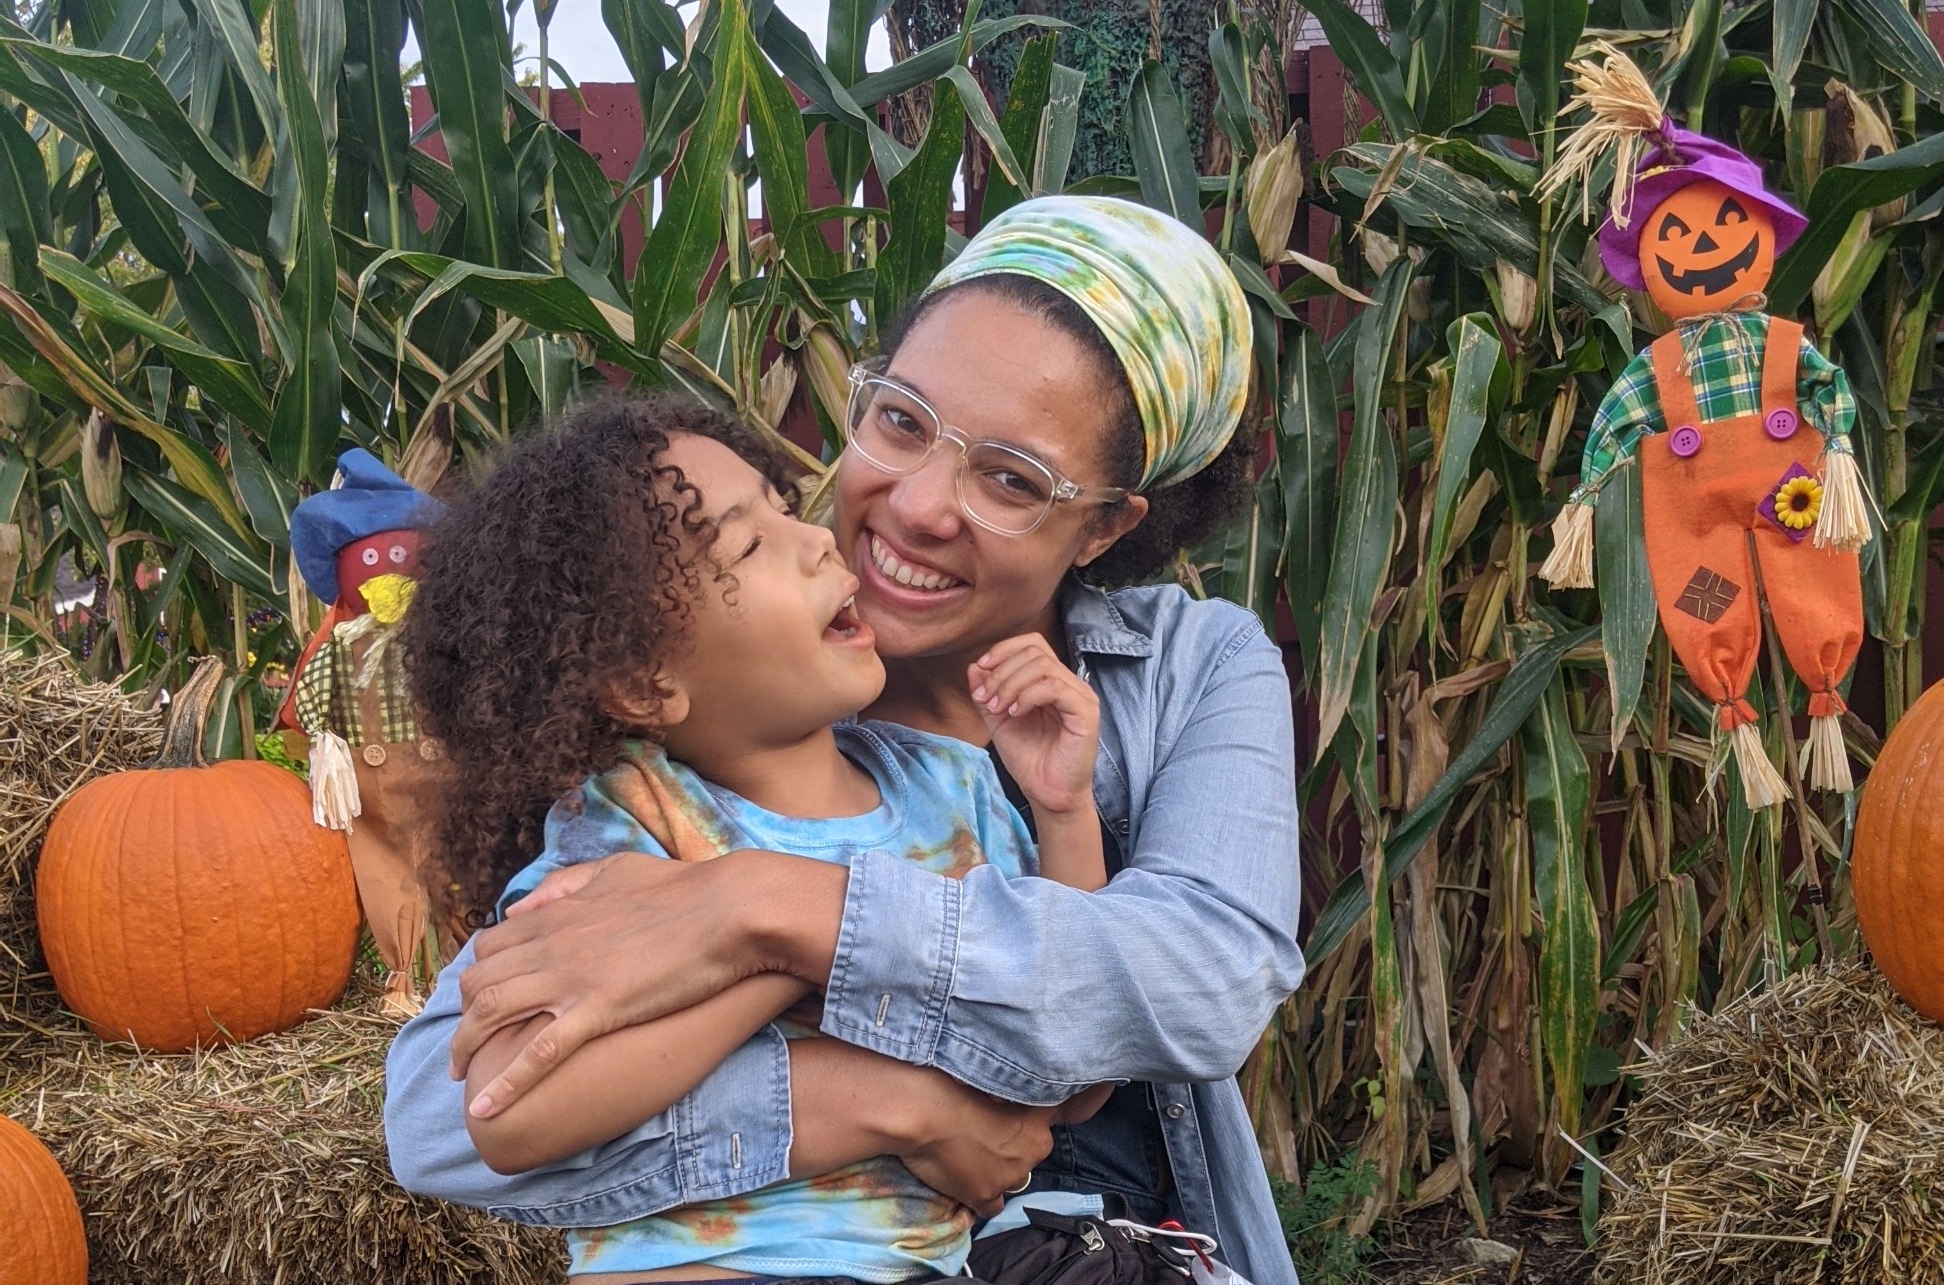  Light-skinned black mother wearing hand-dyed bandana and clear framed glasses with a big smile, holding her 6 yr old light-skinned kid with long brown curly hair in front of an array of fall items, corn stalks, hay bales, and pumpkins 